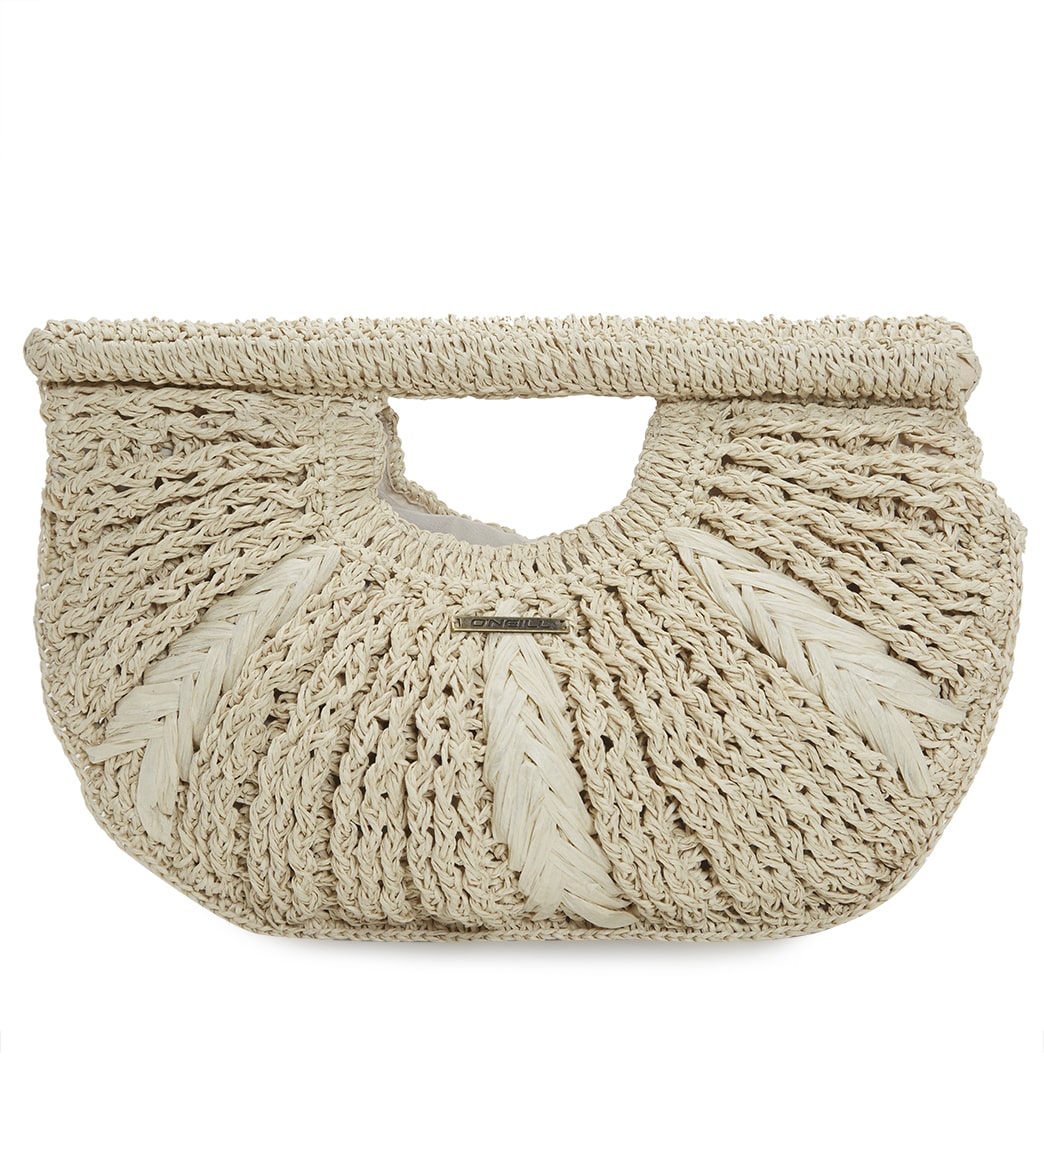 O'neill Vices Straw Clutch - Natural - Swimoutlet.com